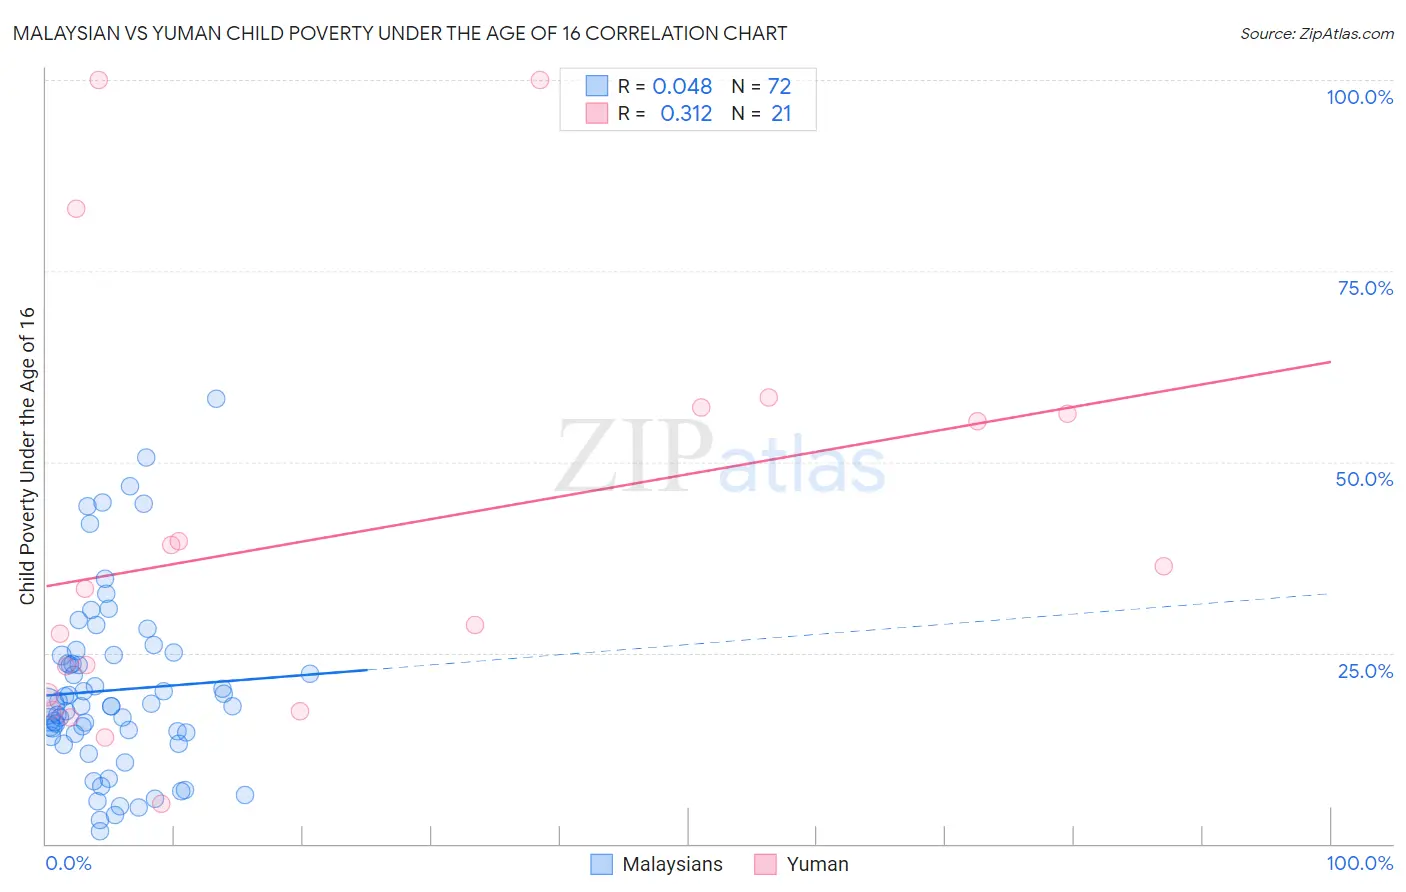 Malaysian vs Yuman Child Poverty Under the Age of 16